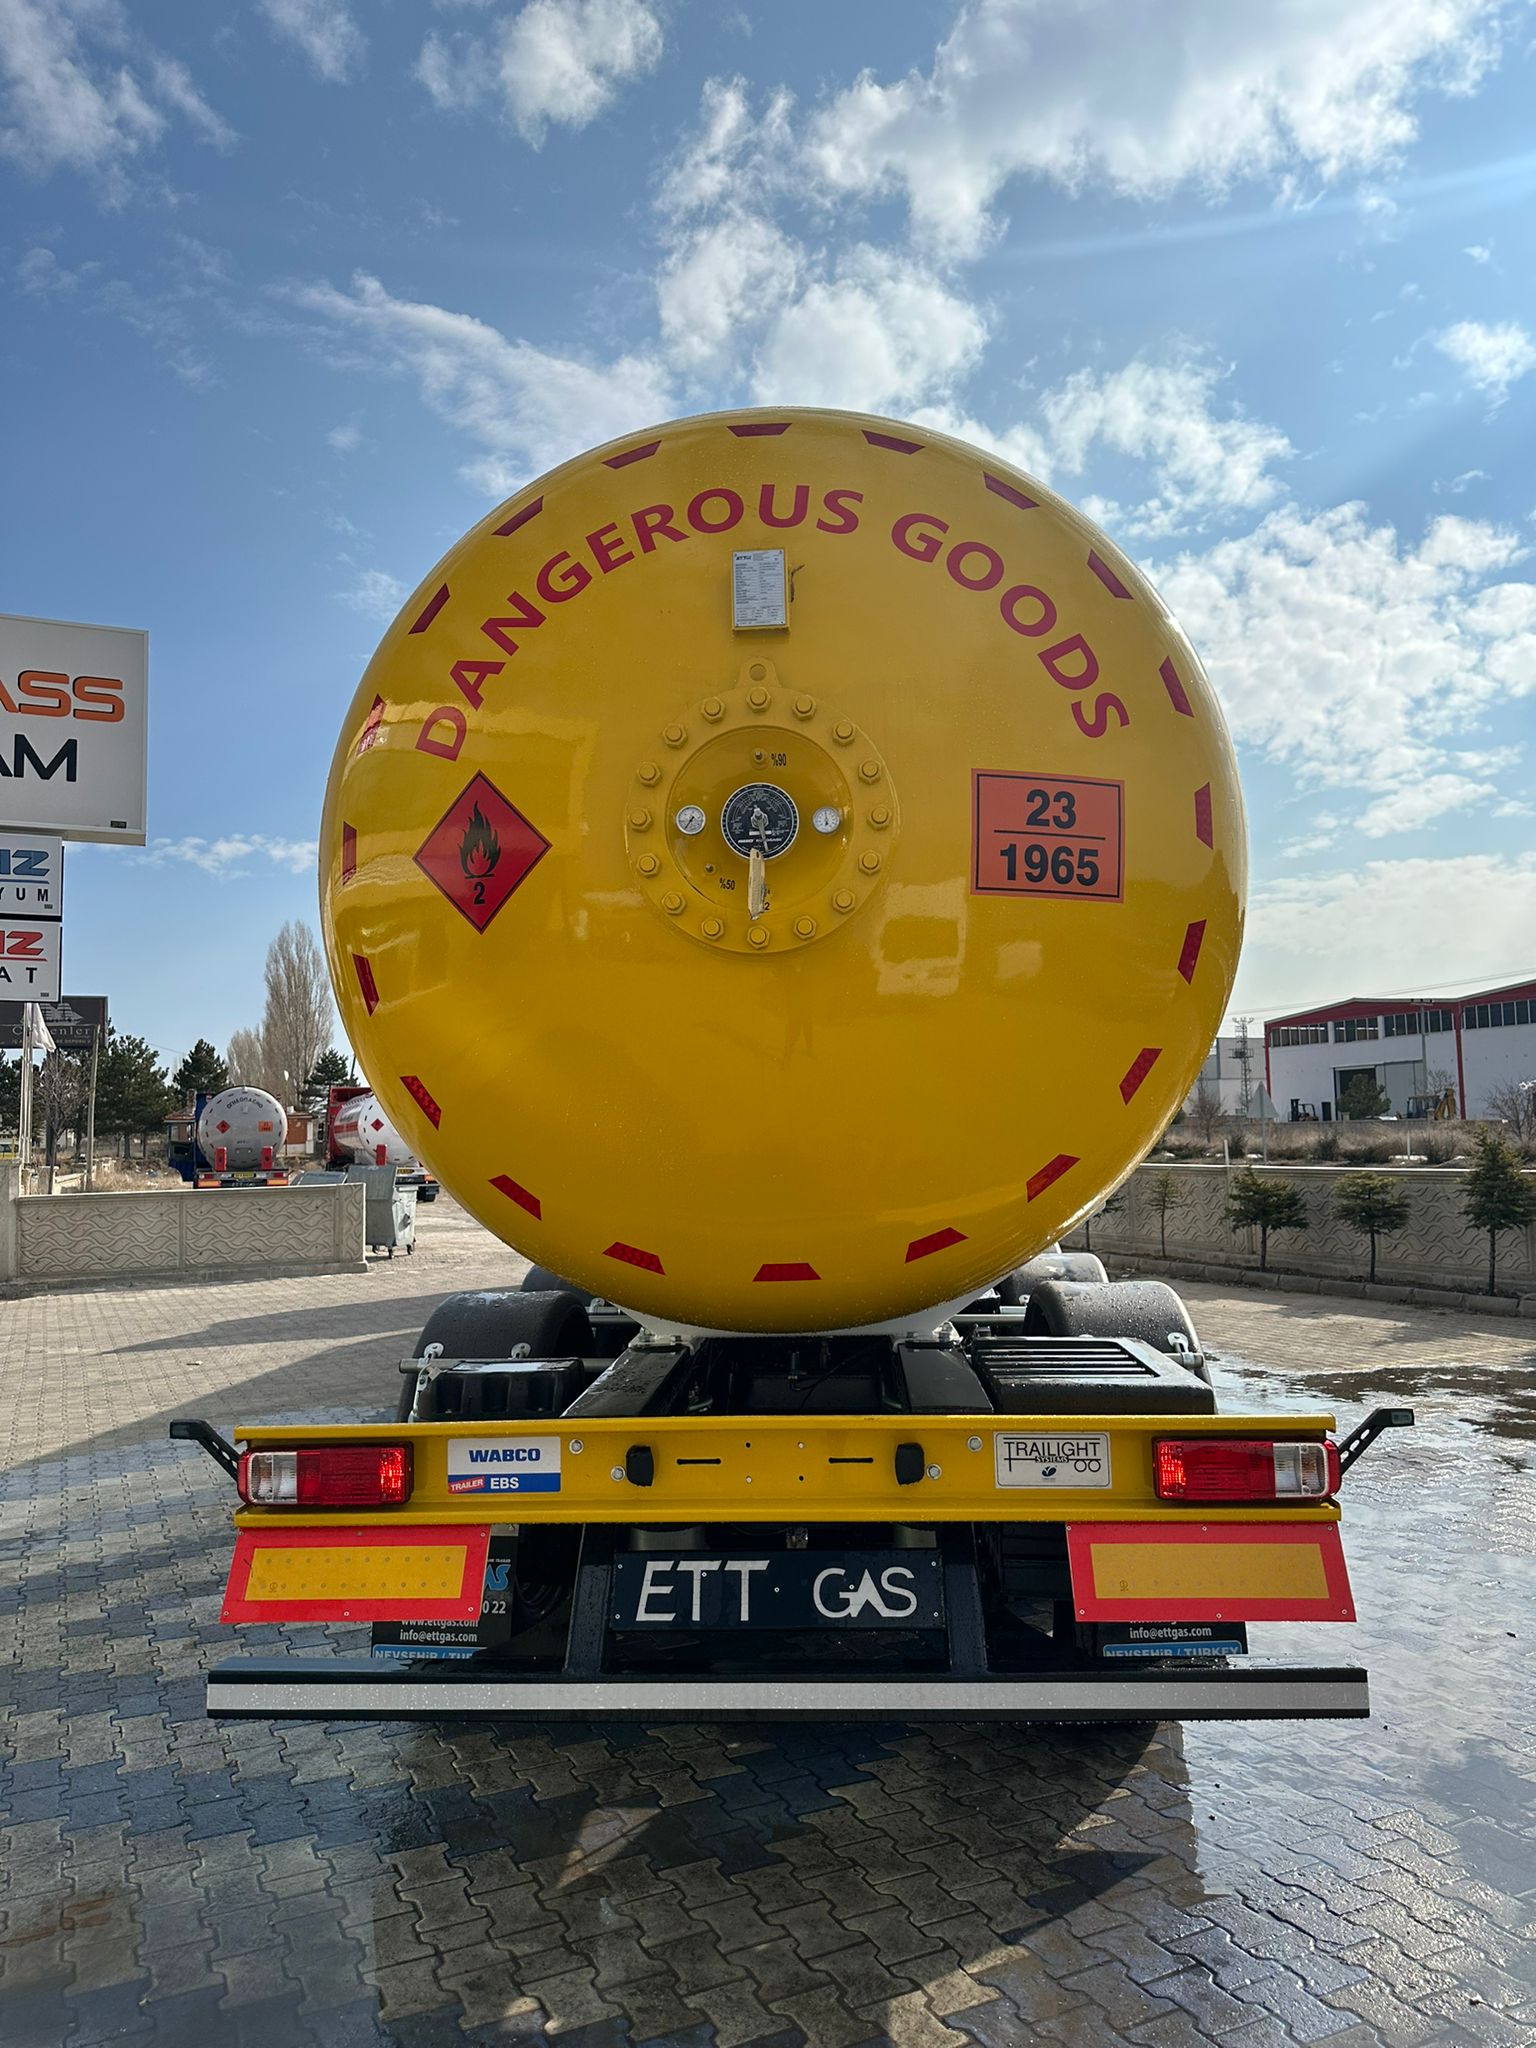 We delivered 70 m3 LPG Trailer with ADR Certificate (P25BN) 4 axles